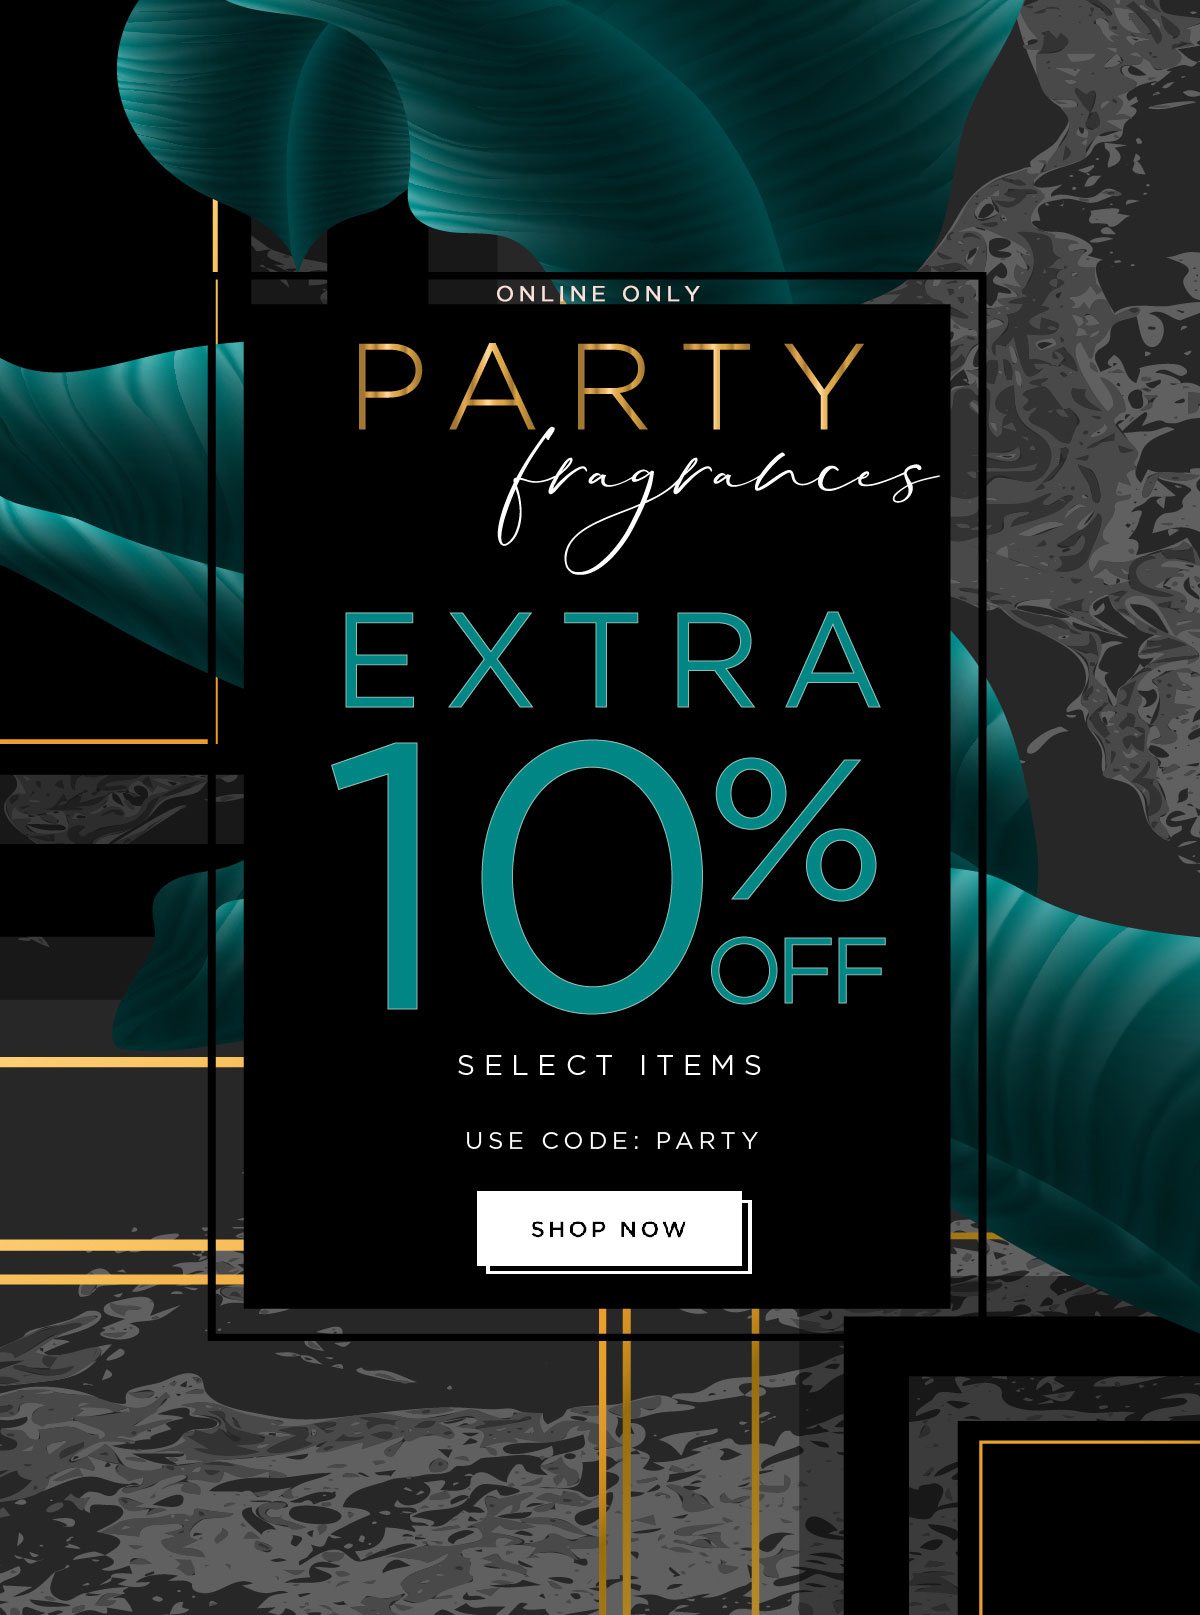 Party Fragrances - Extra 10% off - Select fragrances - Use Code: PARTY - Shop Now 